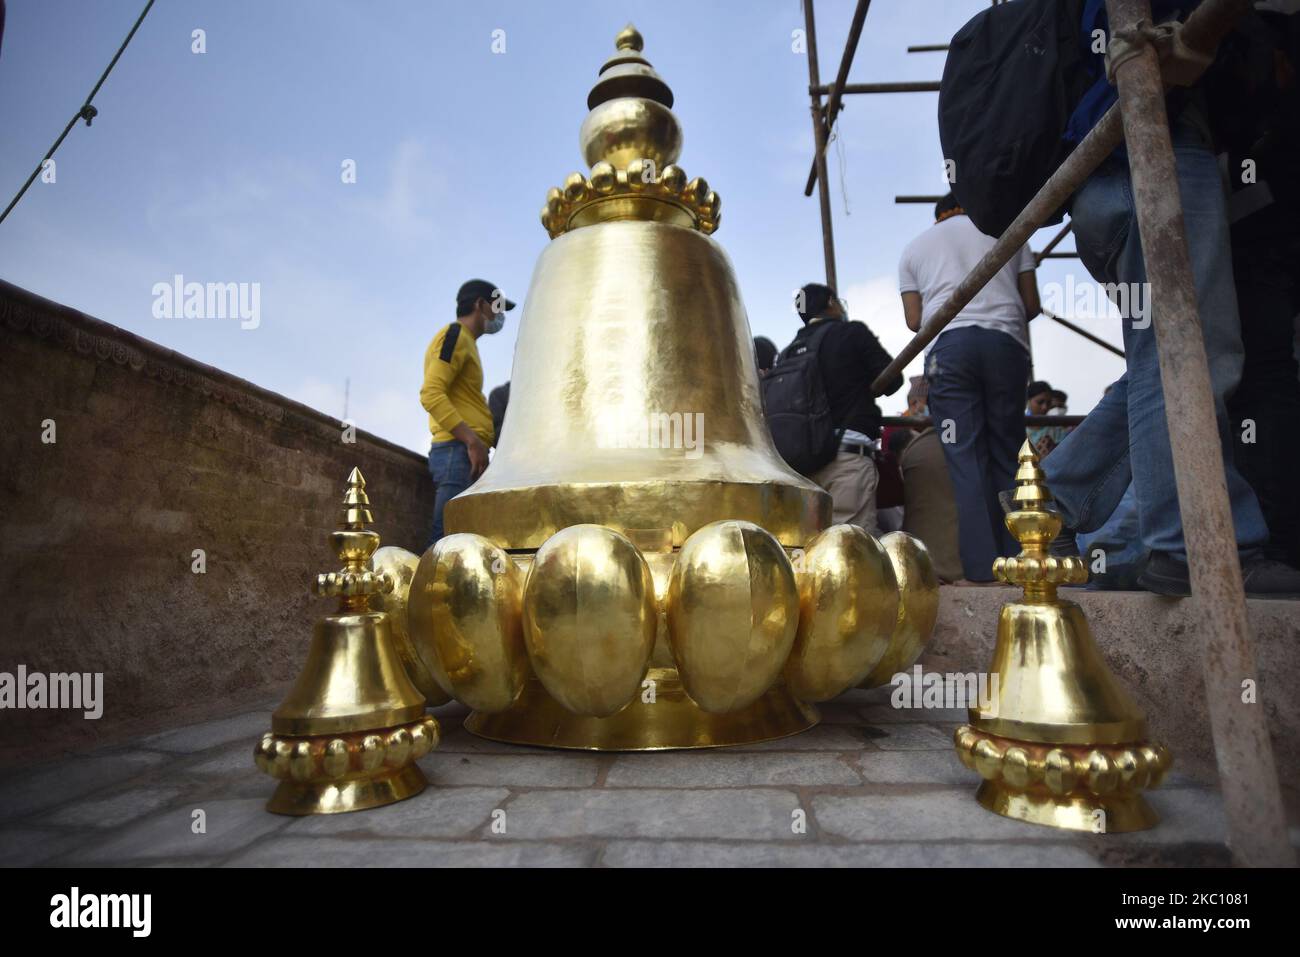 Nepalese people brought pinnacle to put on the top of Rani Pokhari's Bal Gopaleshwar temple after the reconstruction at Kathmandu, Nepal on Thursday, October 1, 2020. The temple which destroyed during 2015 earthquake and recently rebuilt in the original Malla-era Shikar style. (Photo by Narayan Maharjan/NurPhoto) Stock Photo